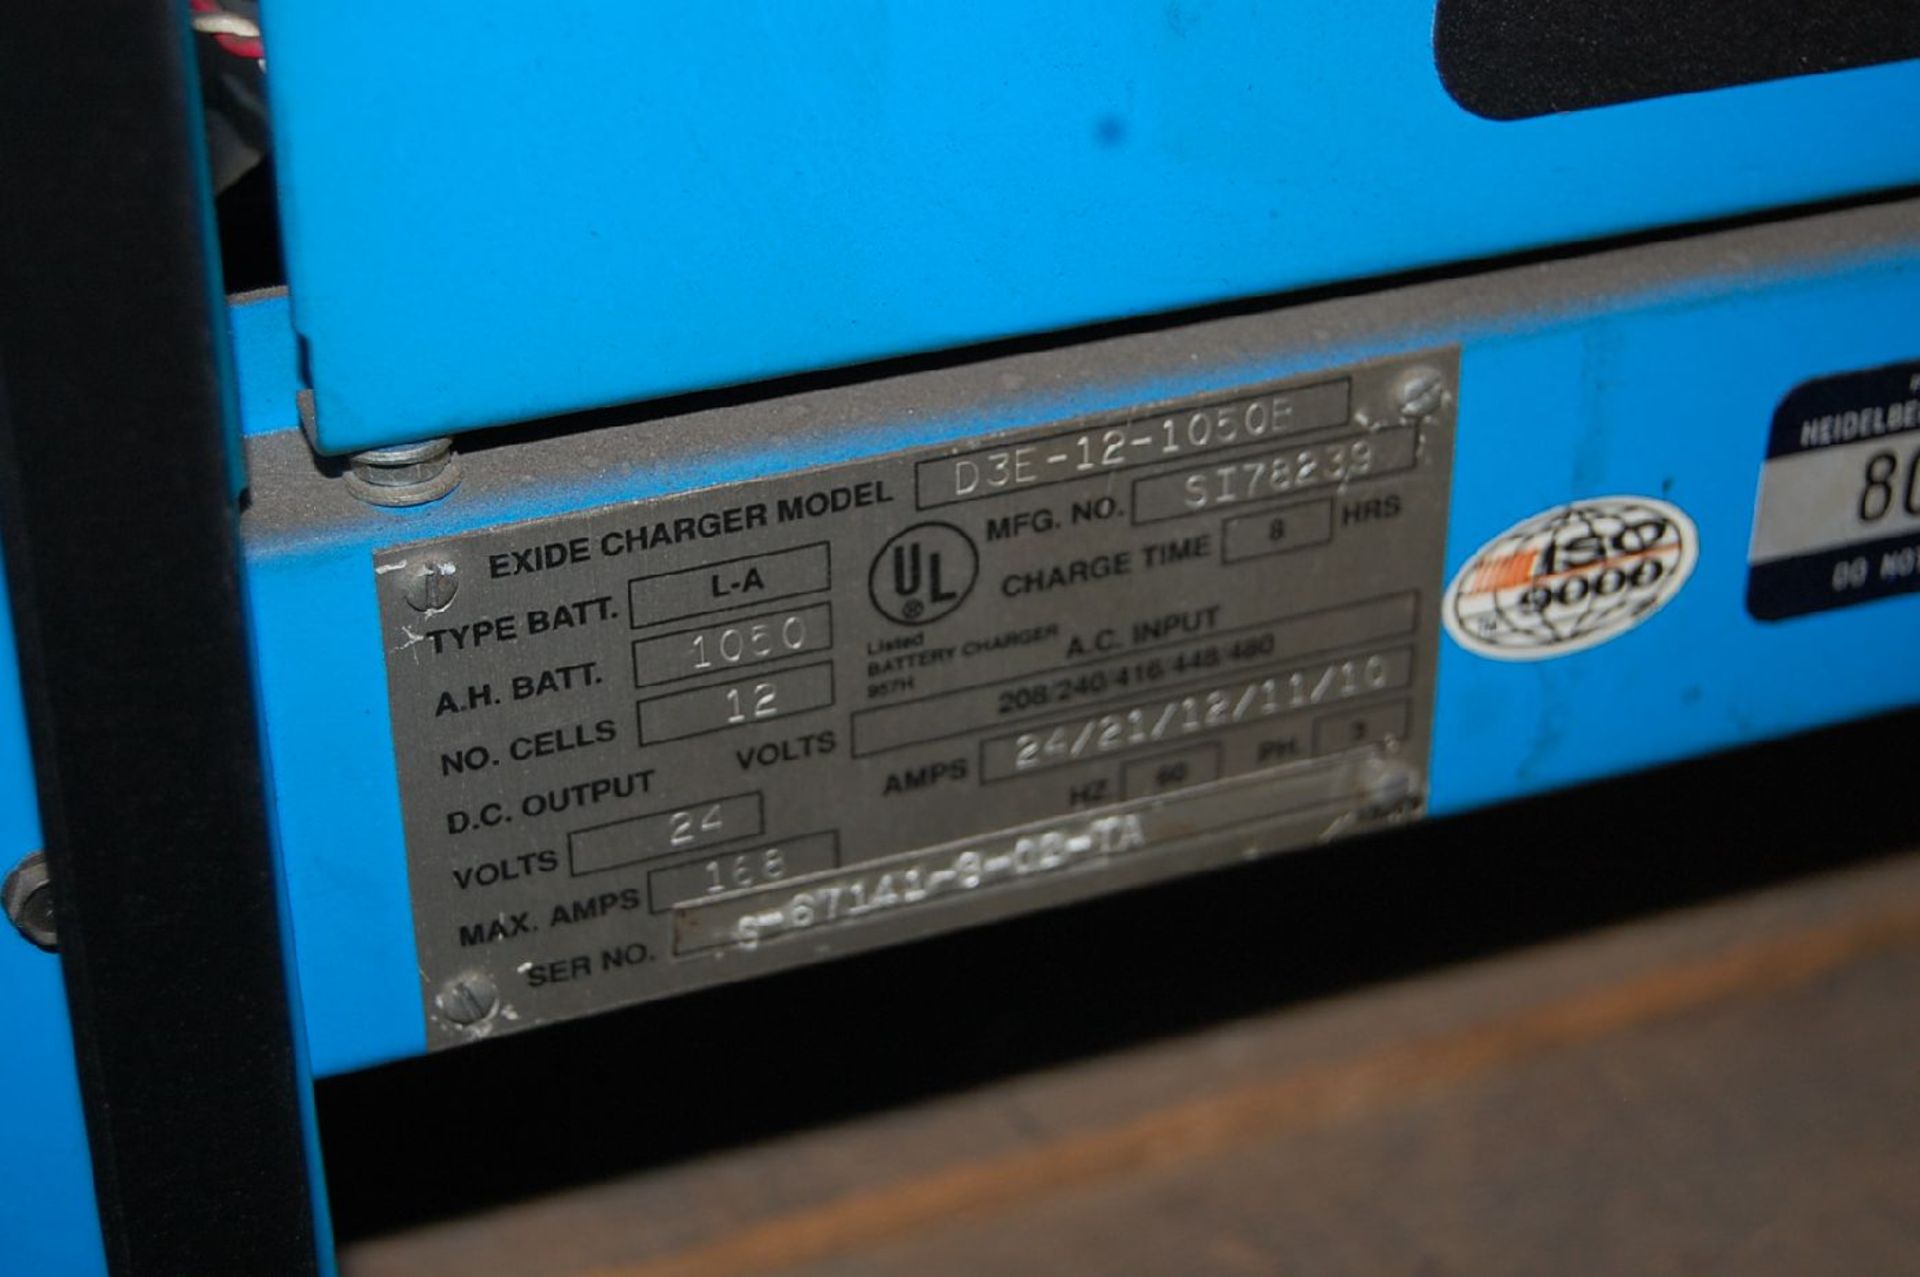 Exide Type L-A; 12 Cell / 24 Volt Battery Chargers - Image 3 of 3